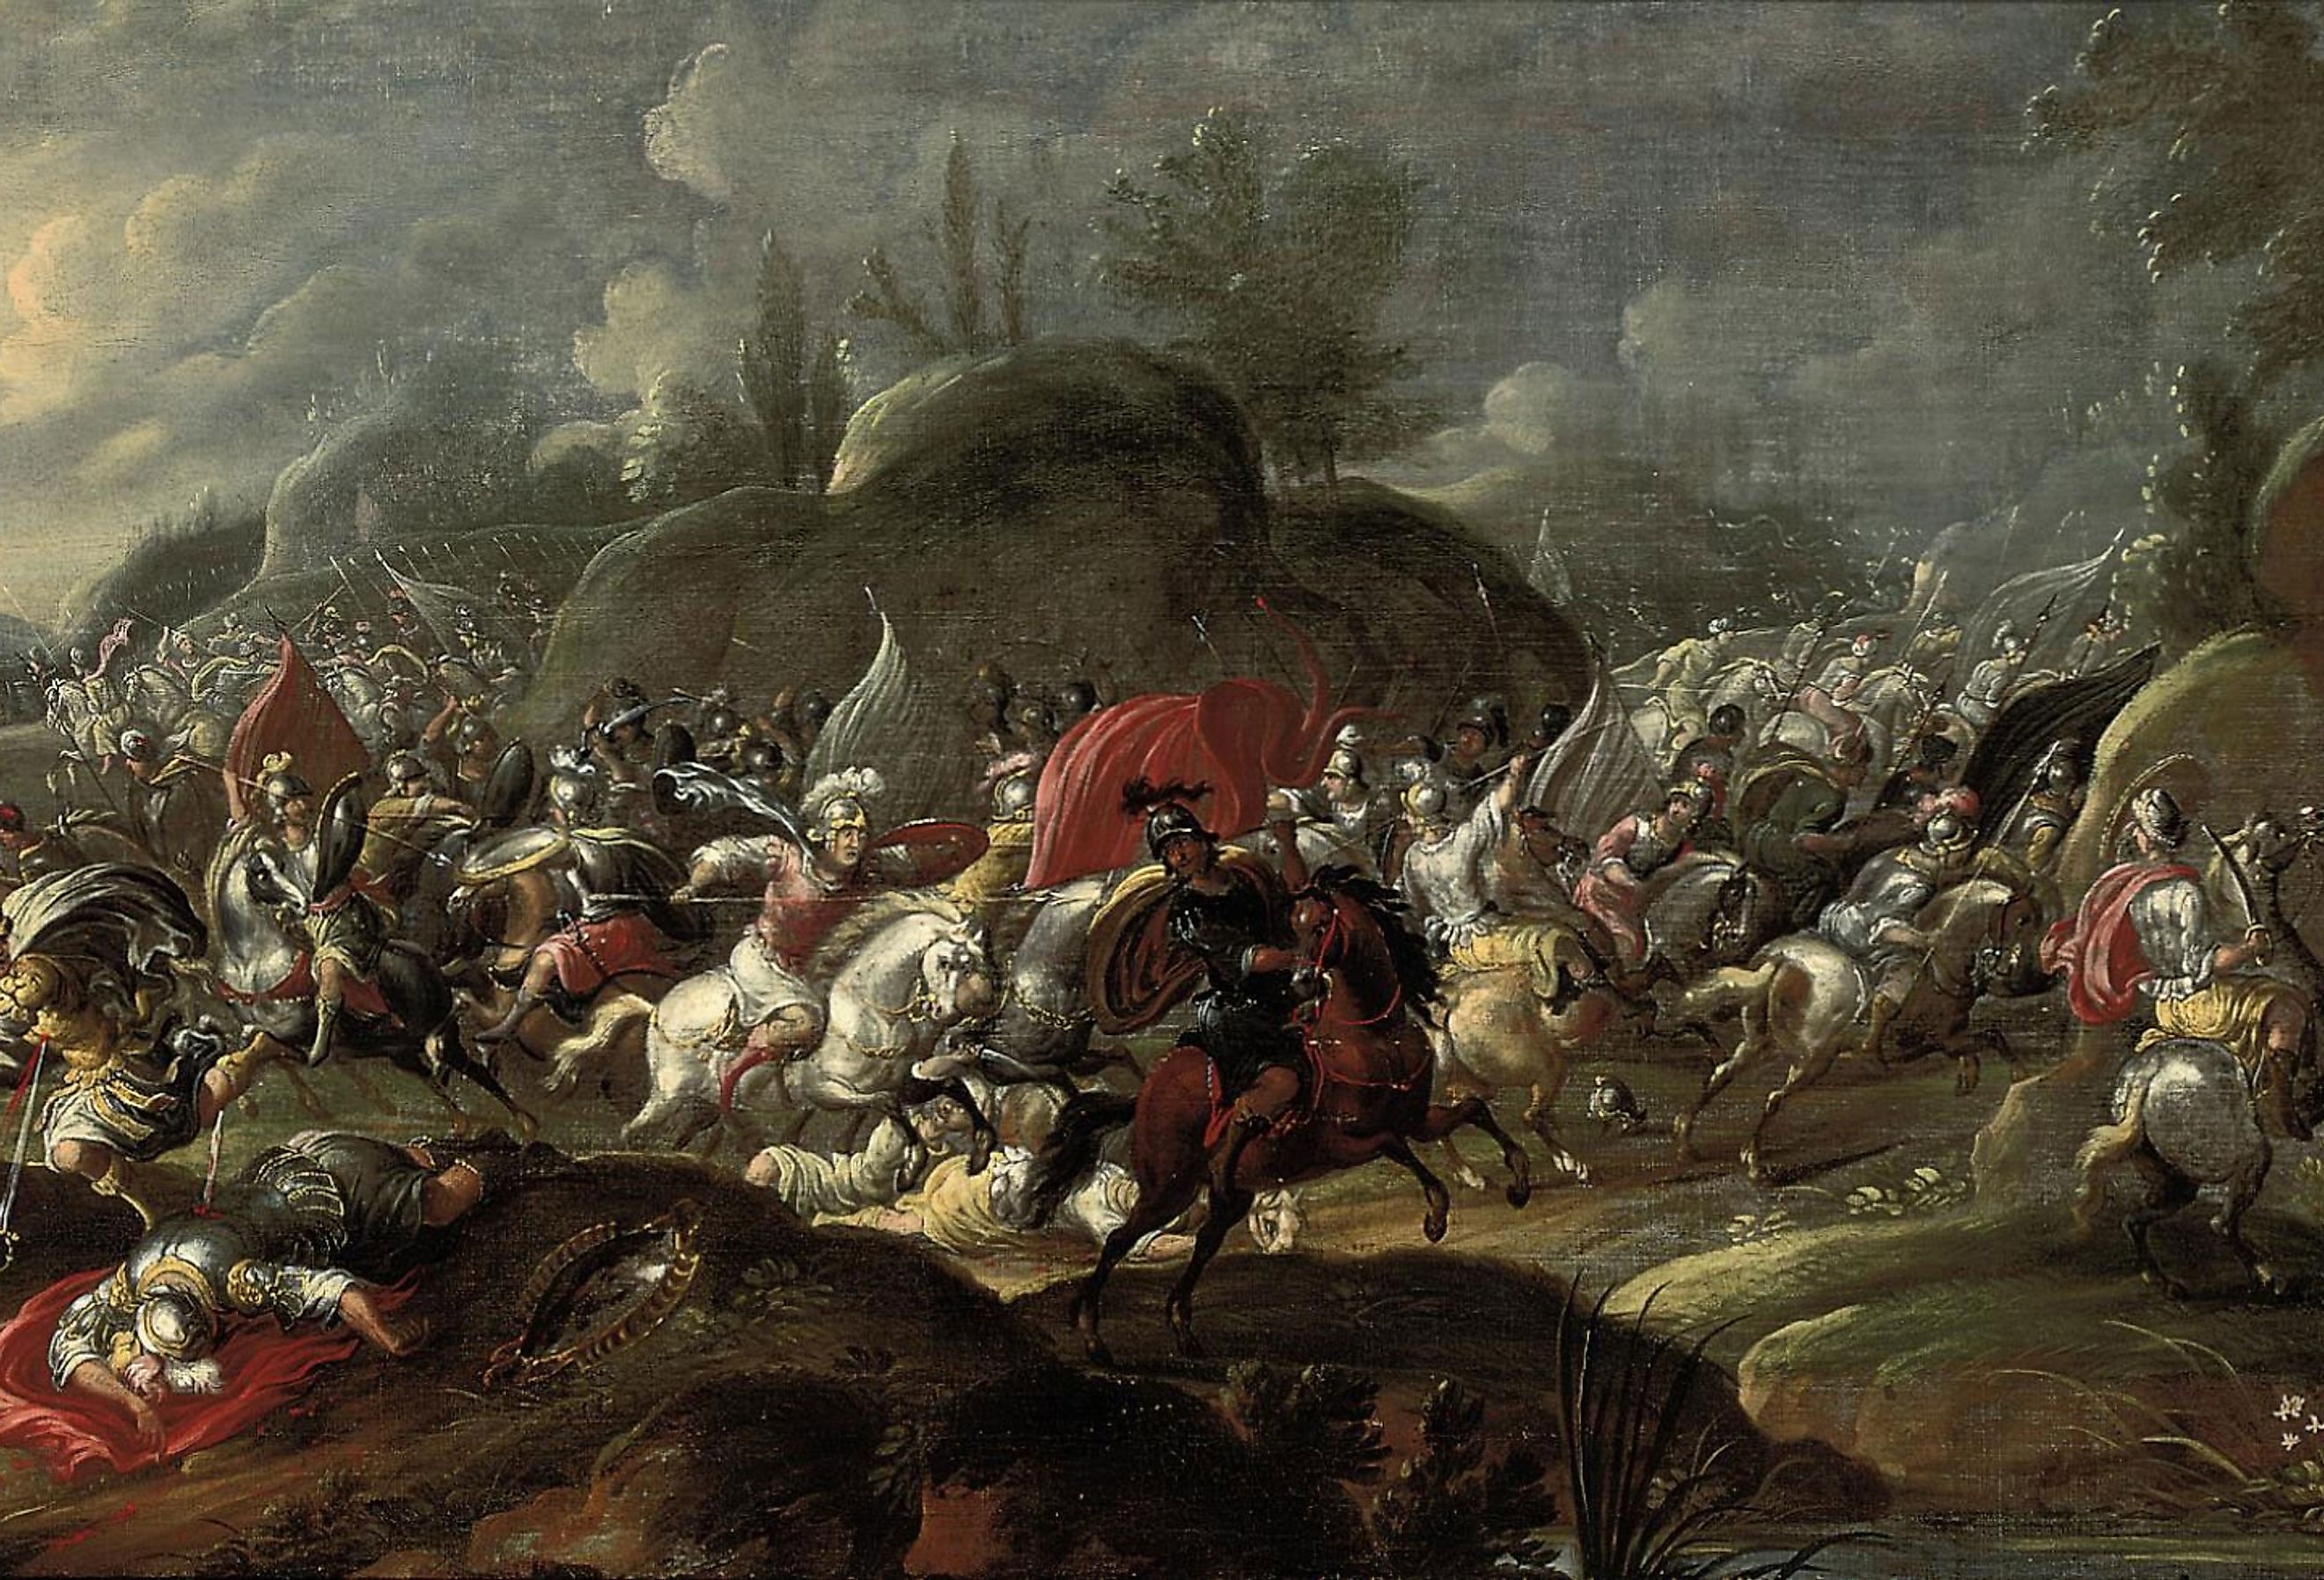 A depiction of the Death of Brutus and Cassius at the Battle of Philippi.